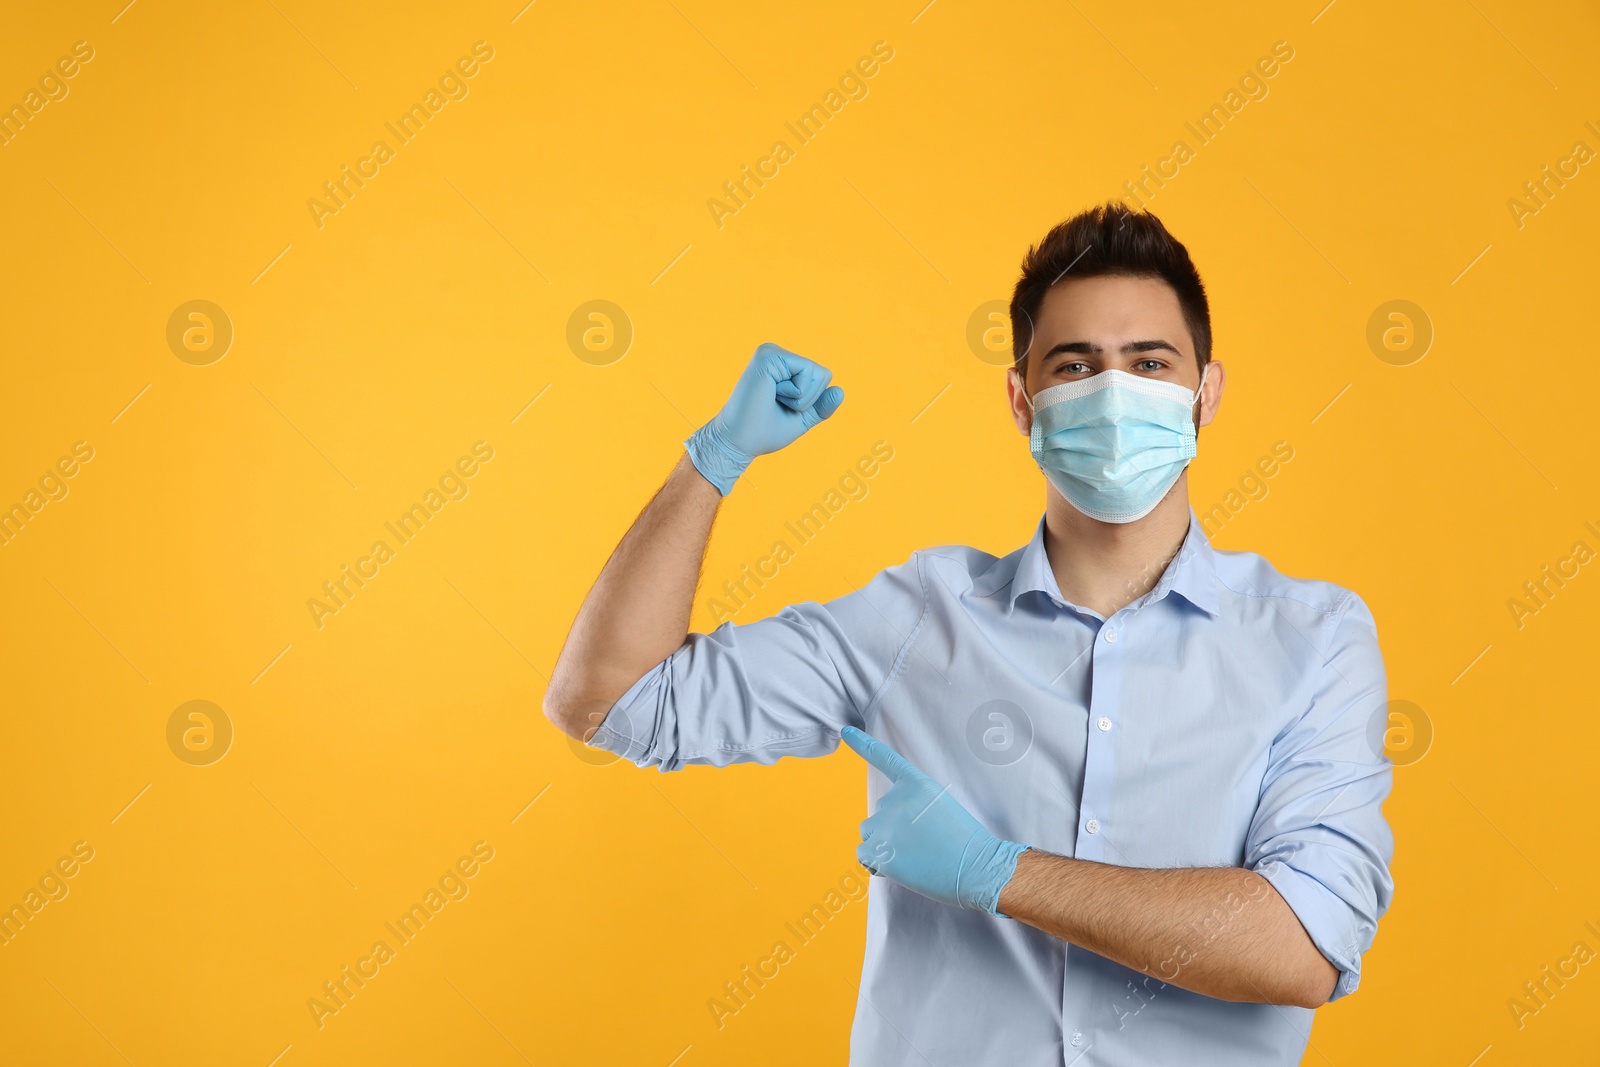 Photo of Man with protective mask and gloves showing muscles on yellow background, space for text. Strong immunity concept